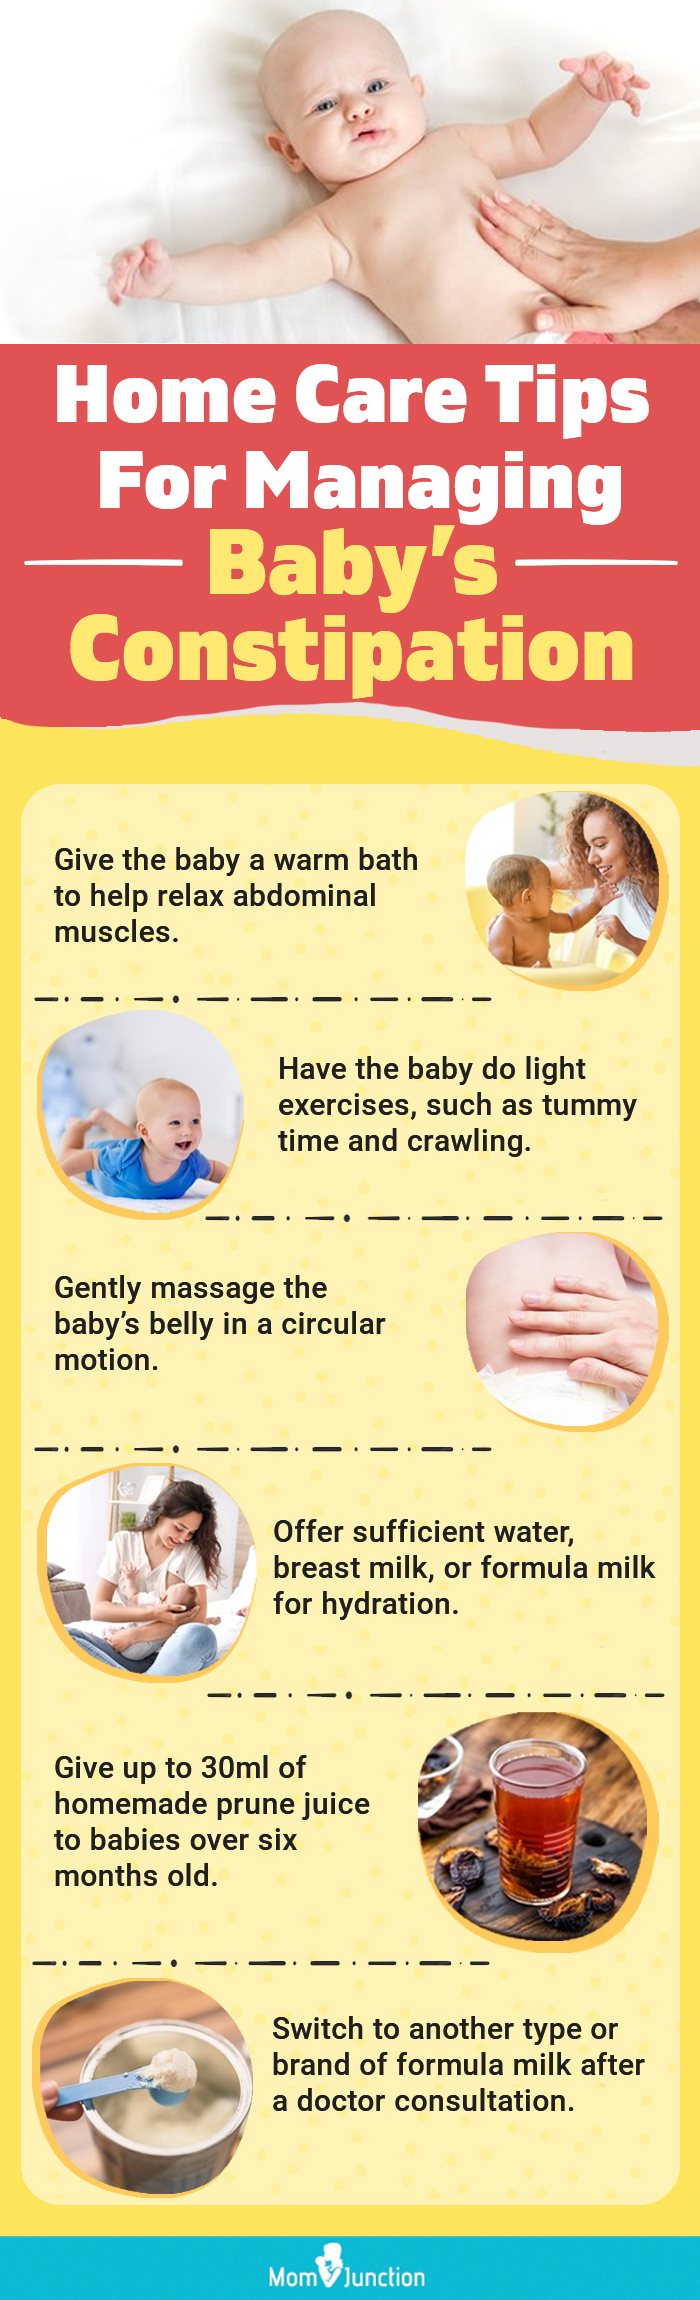 how to relieve constipation in babies quickly home remedies